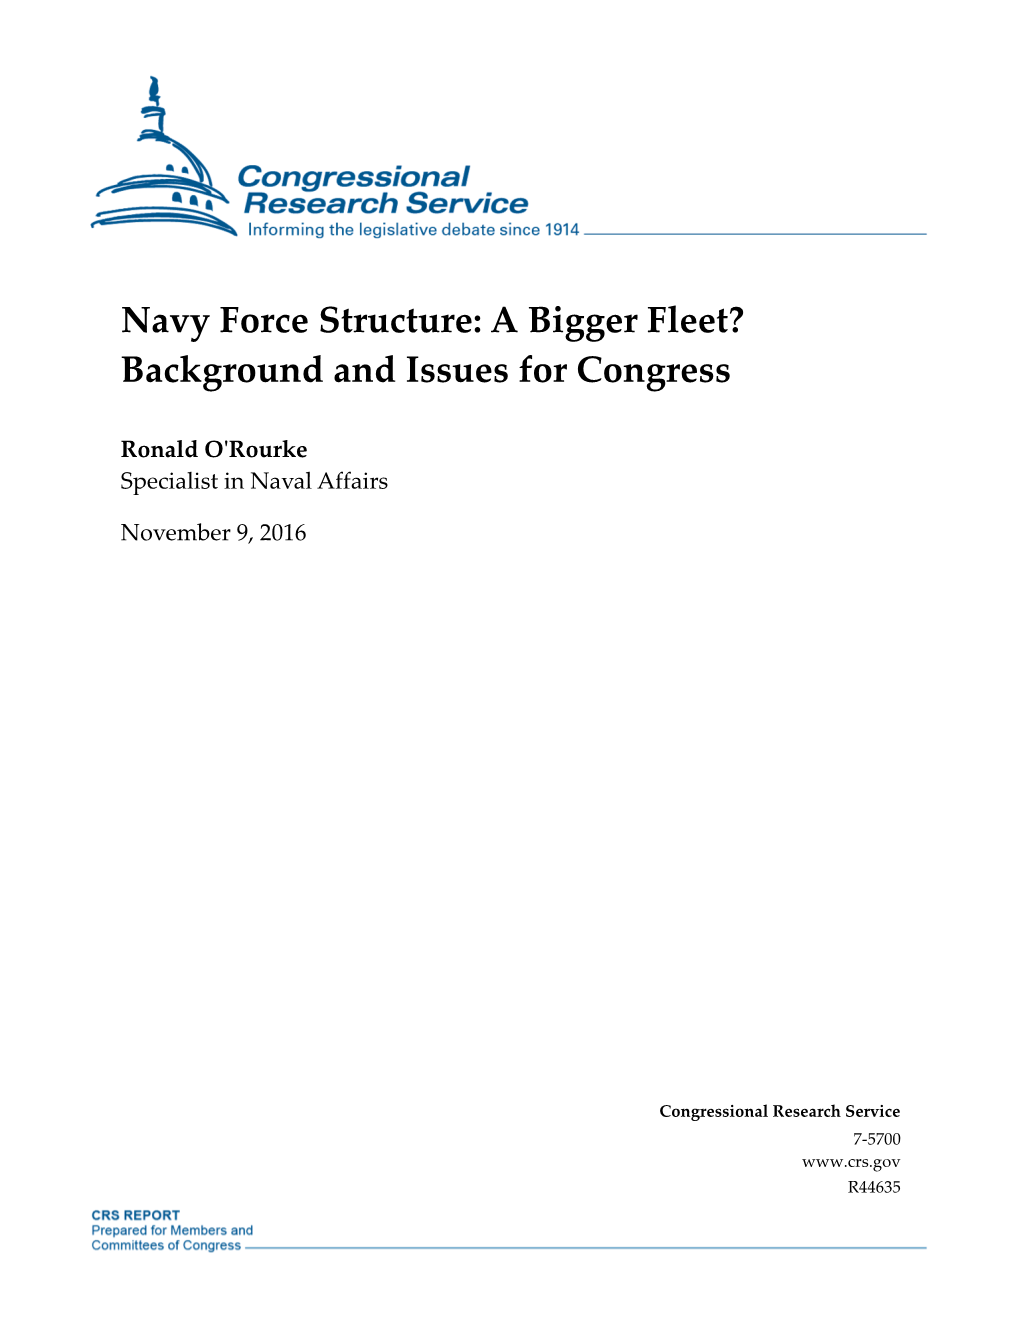 Navy Force Structure: a Bigger Fleet? Background and Issues for Congress